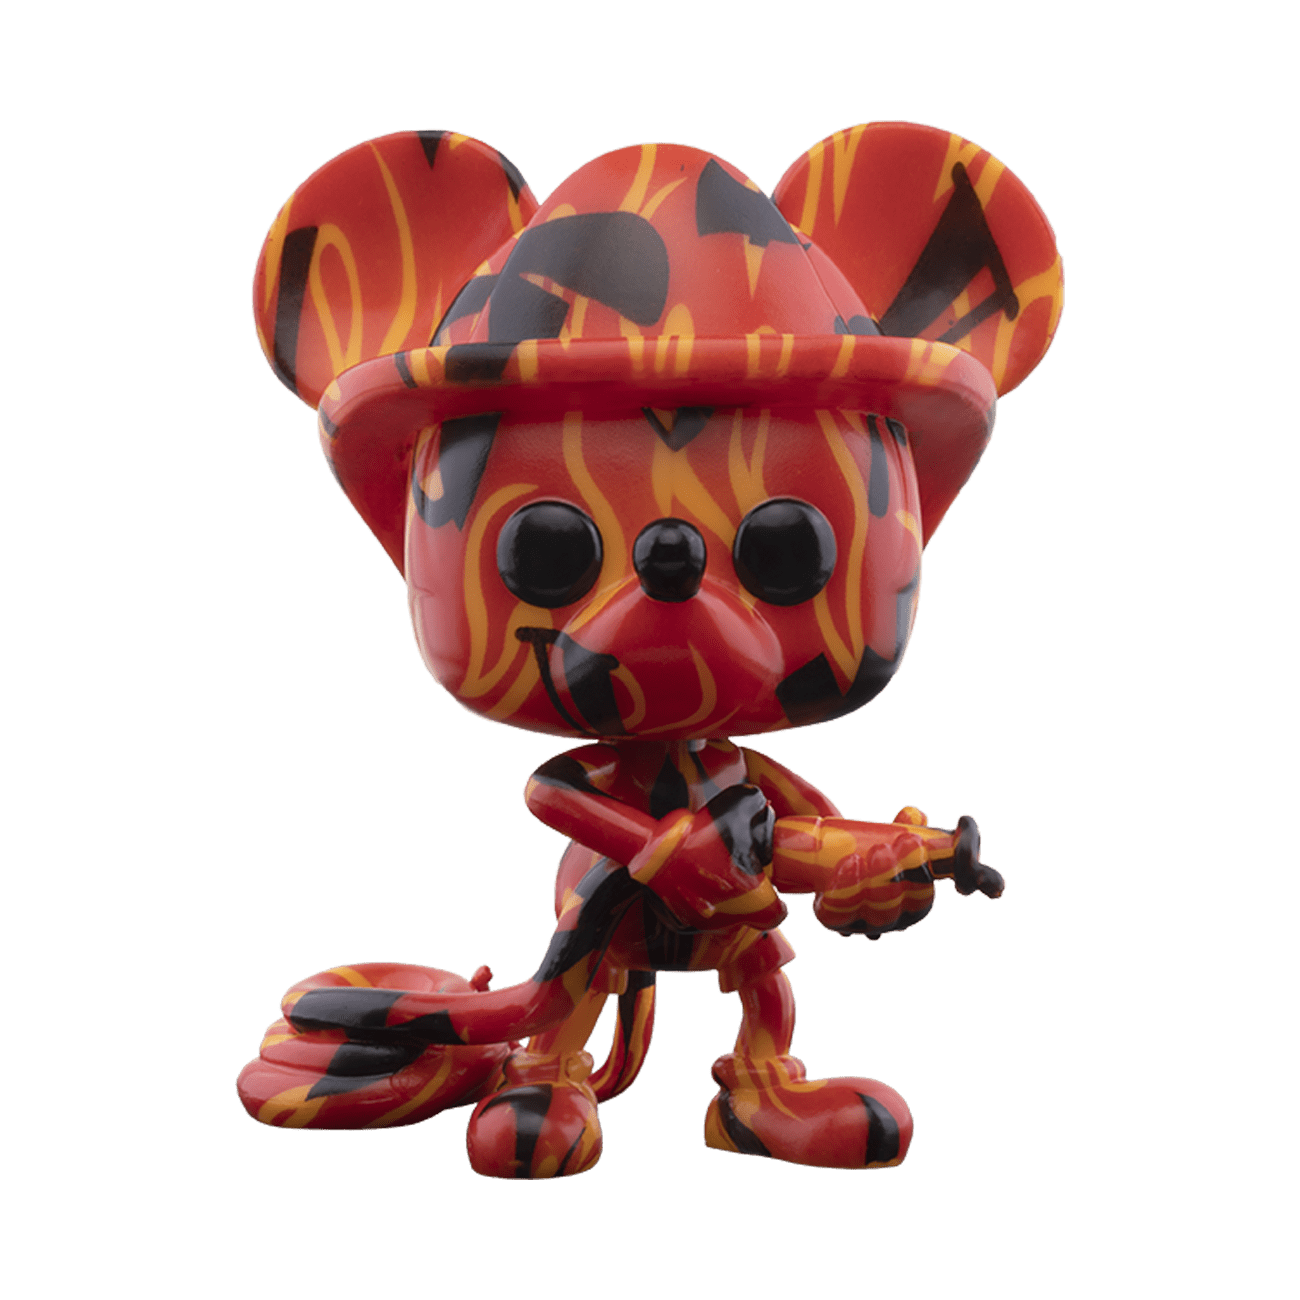 Firefighter Mickey Collectible Figure for sale online Funko Pop Disney 90th 